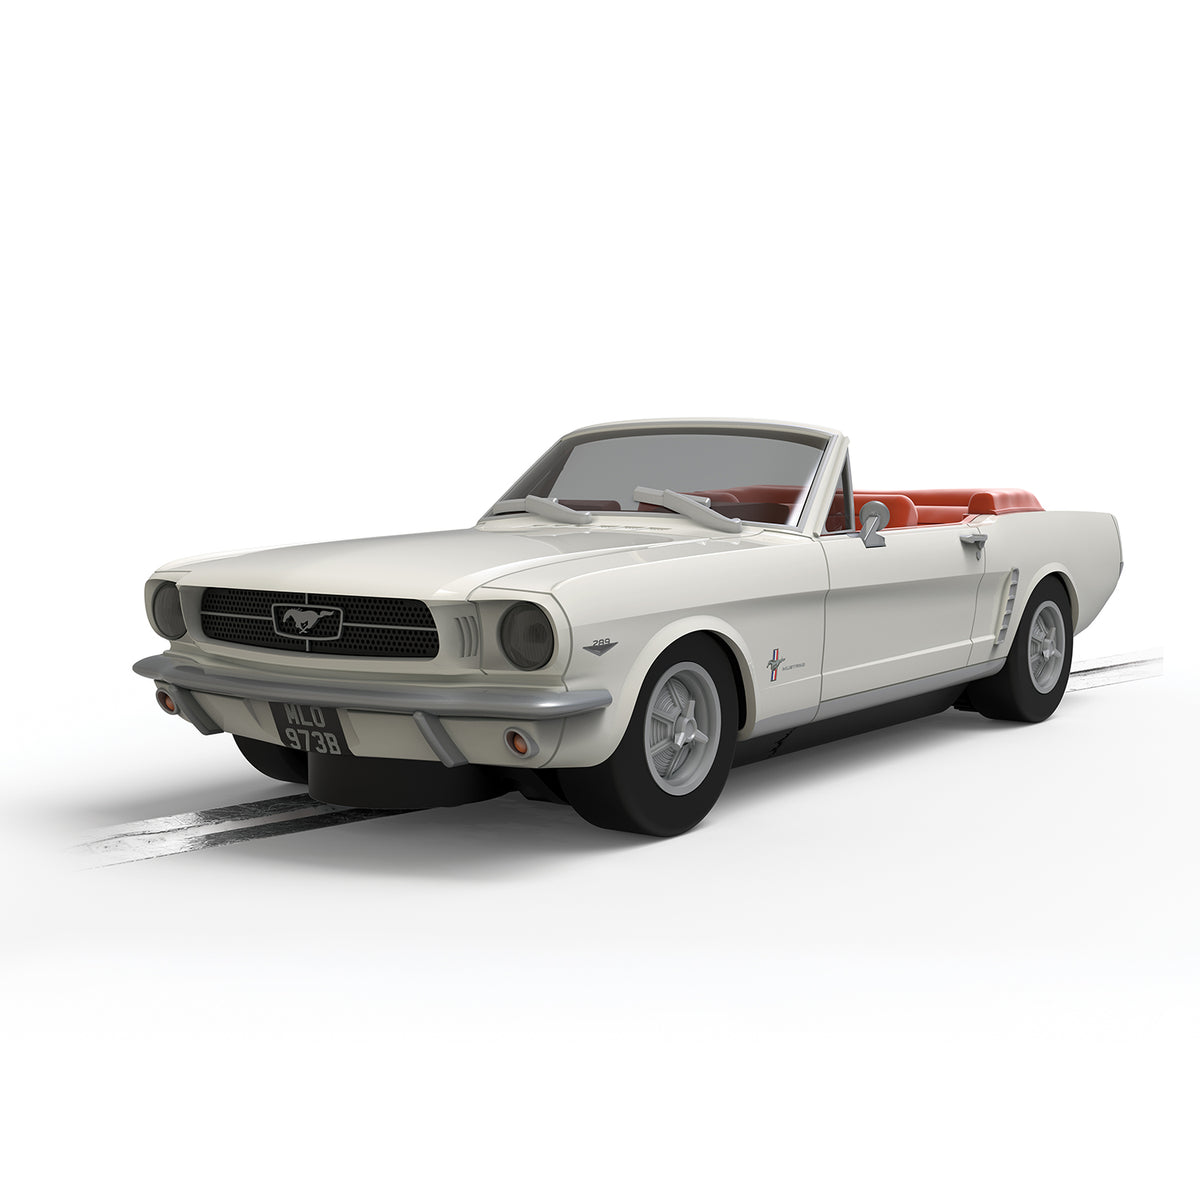 Scalextric James Bond Ford Mustang Cabrio Slotcar - Goldfinger Edition